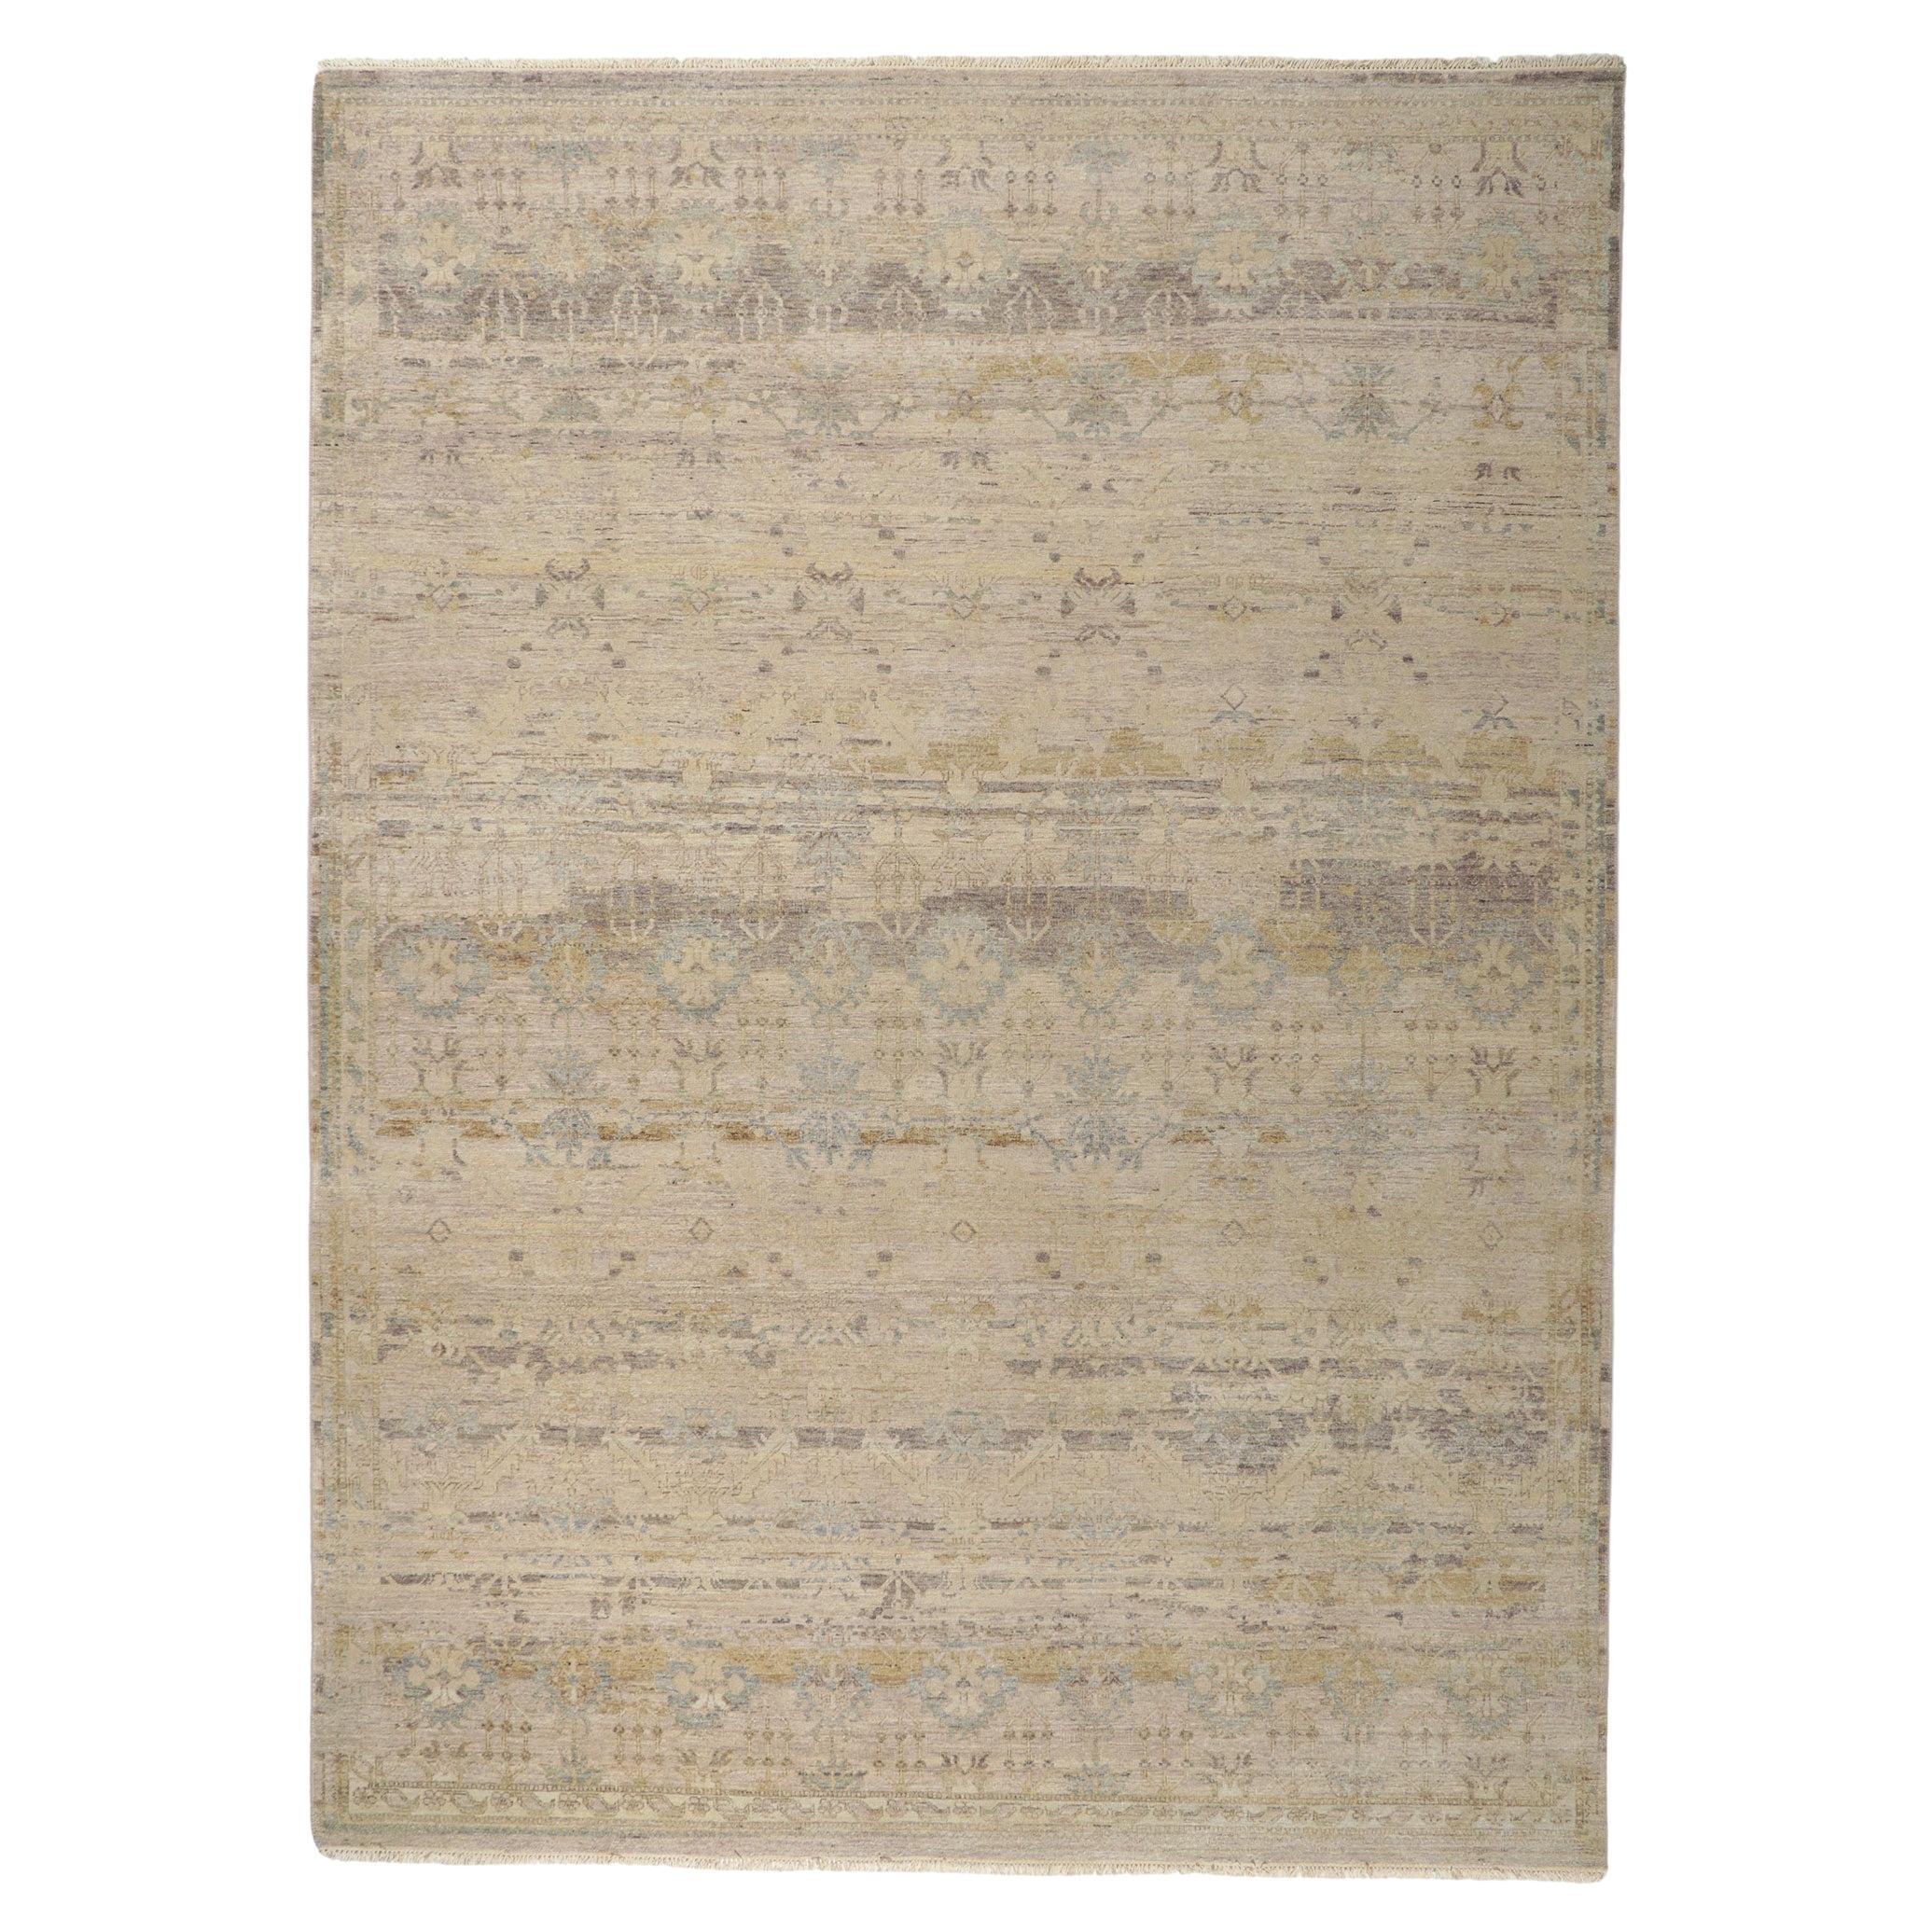 New Vintage-Style Distressed Rug with Neutral Earth-Tone Colors